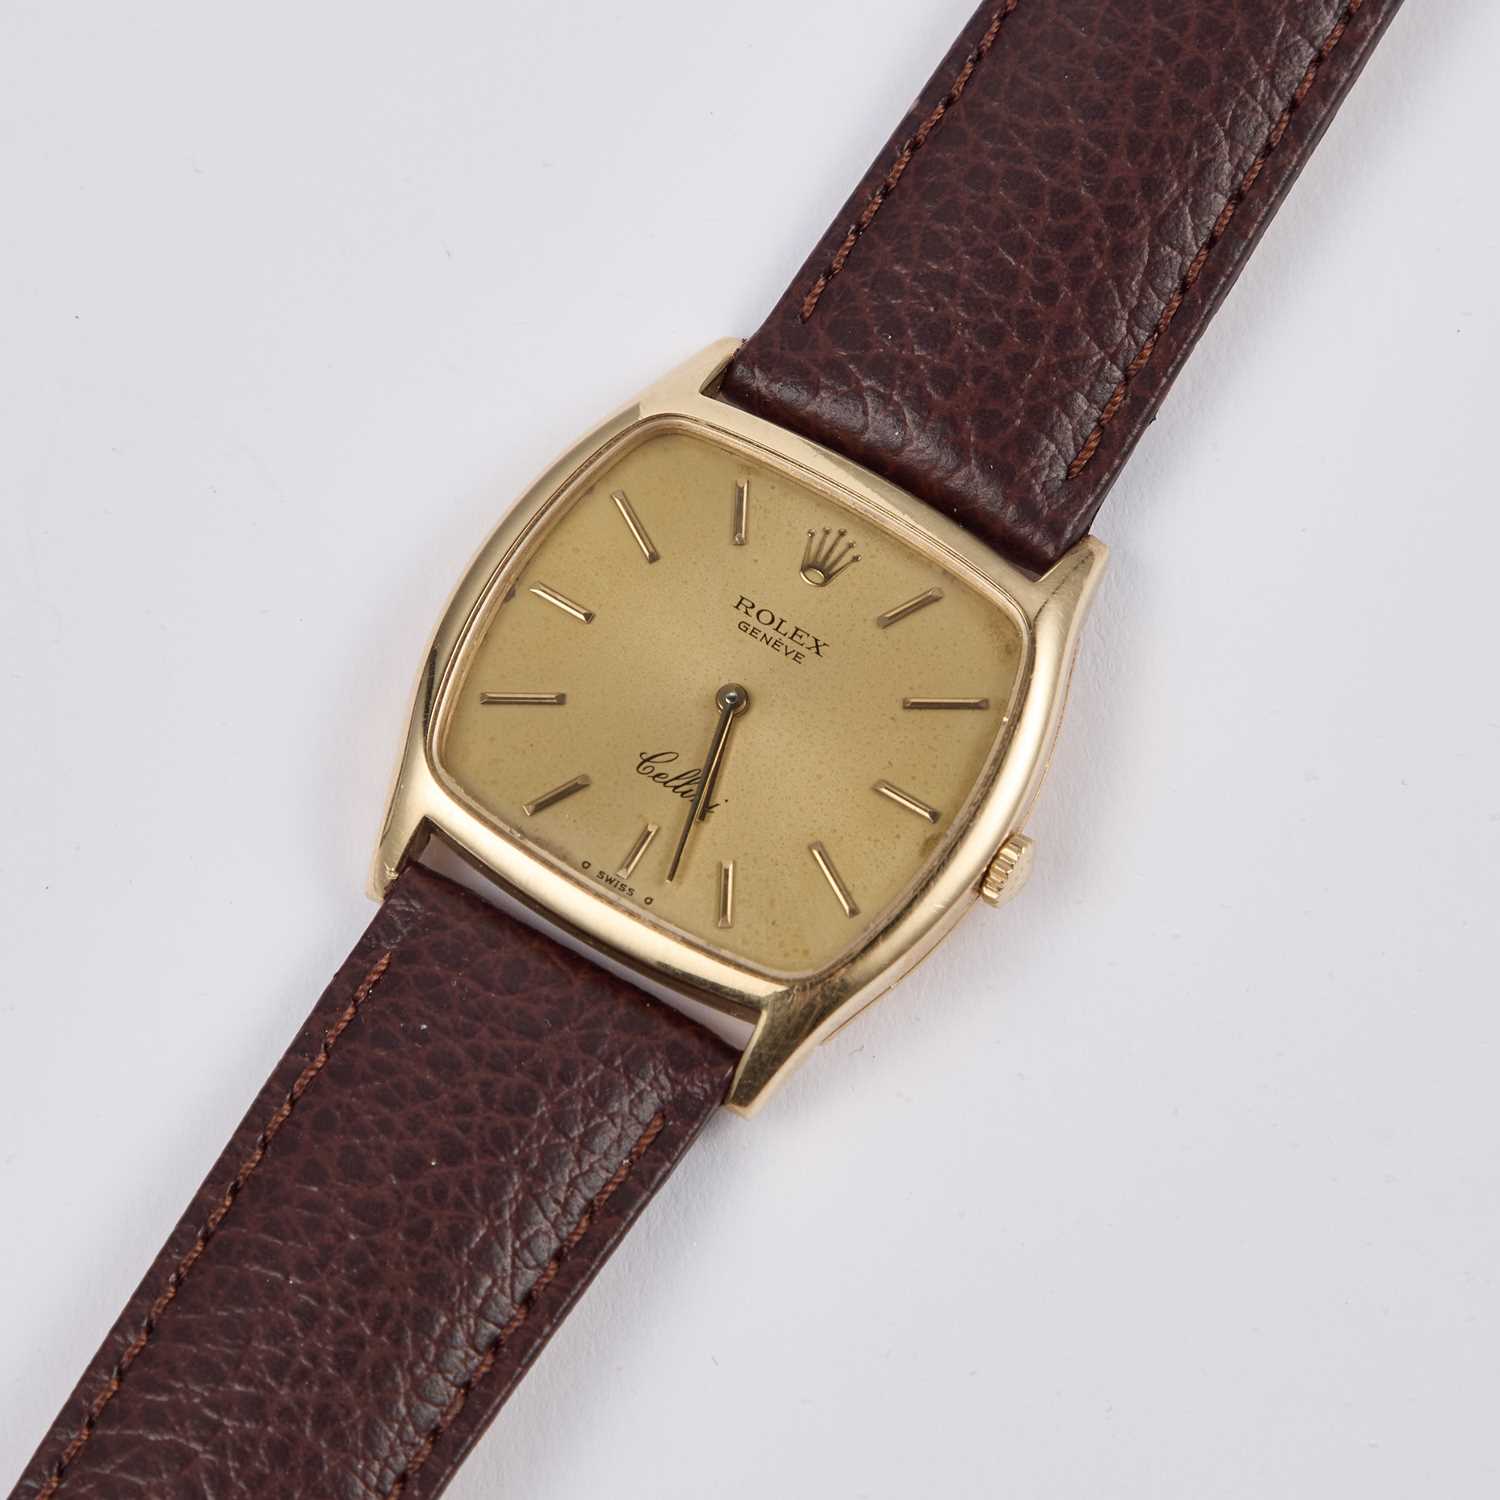 A GENTS 18CT GOLD ROLEX CELLINI STRAP WATCH - Image 2 of 3